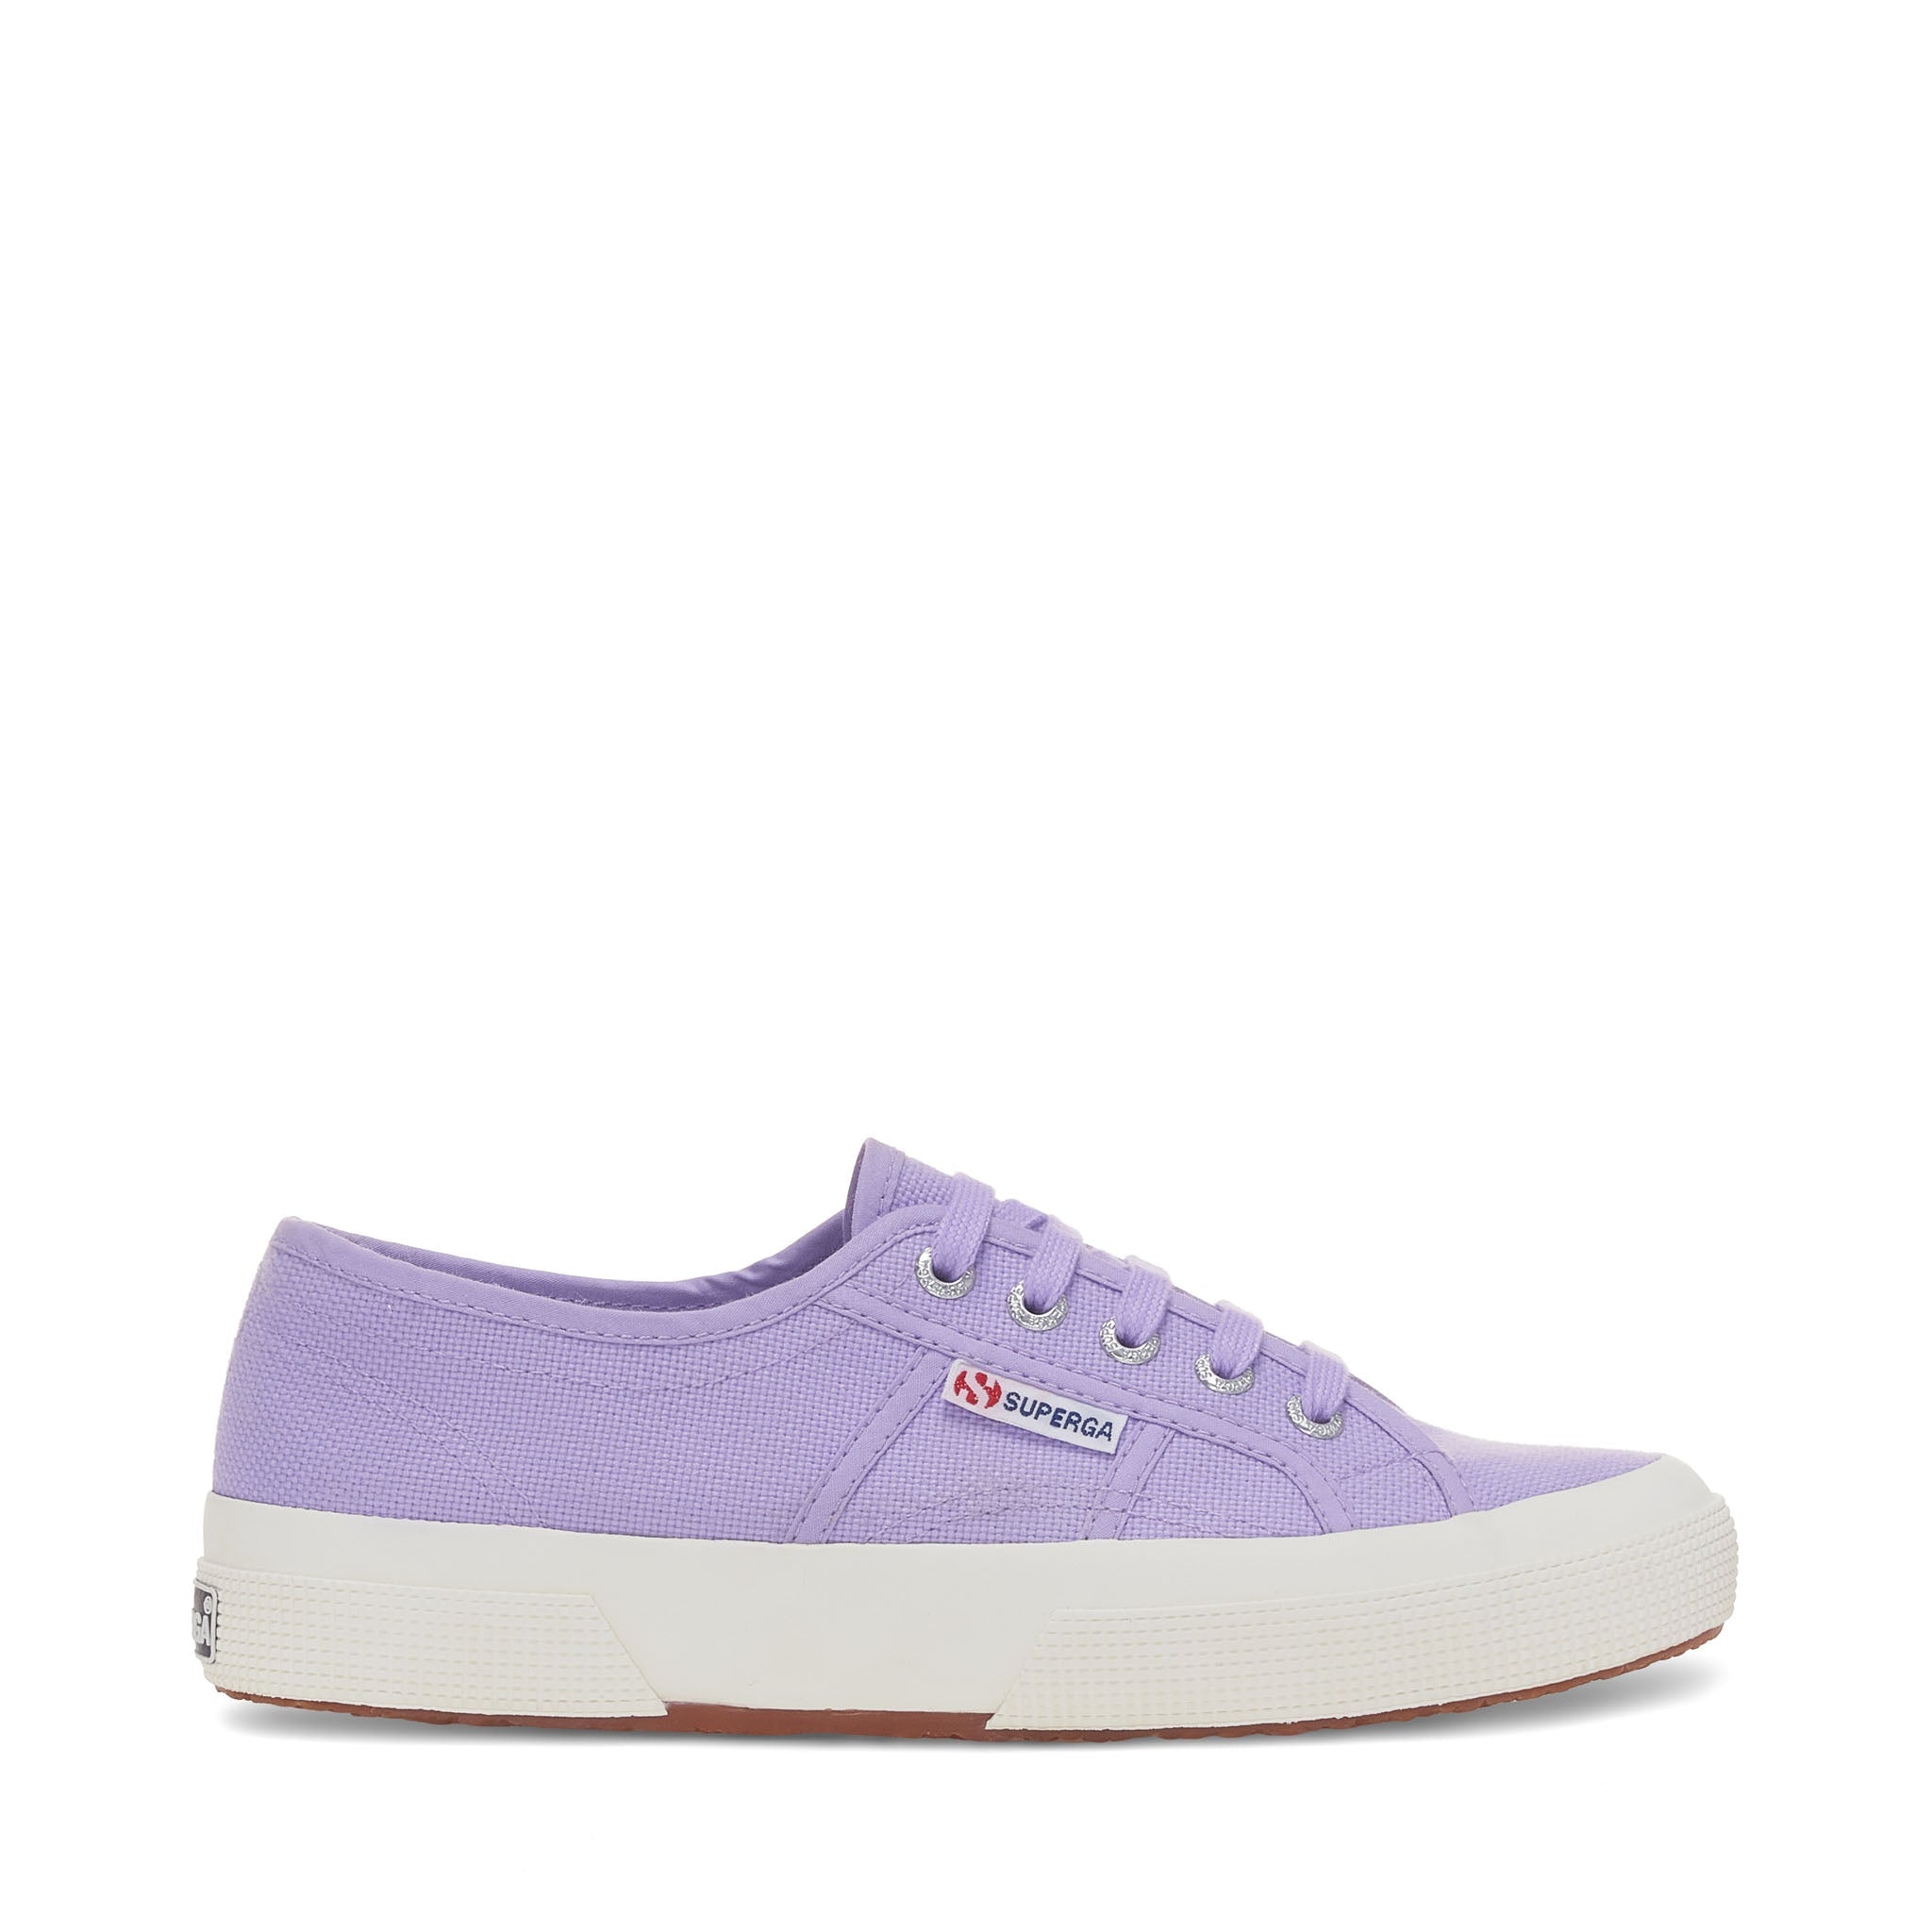 Superga 2750 Cotu Classic Sneakers - Violet. Side view.